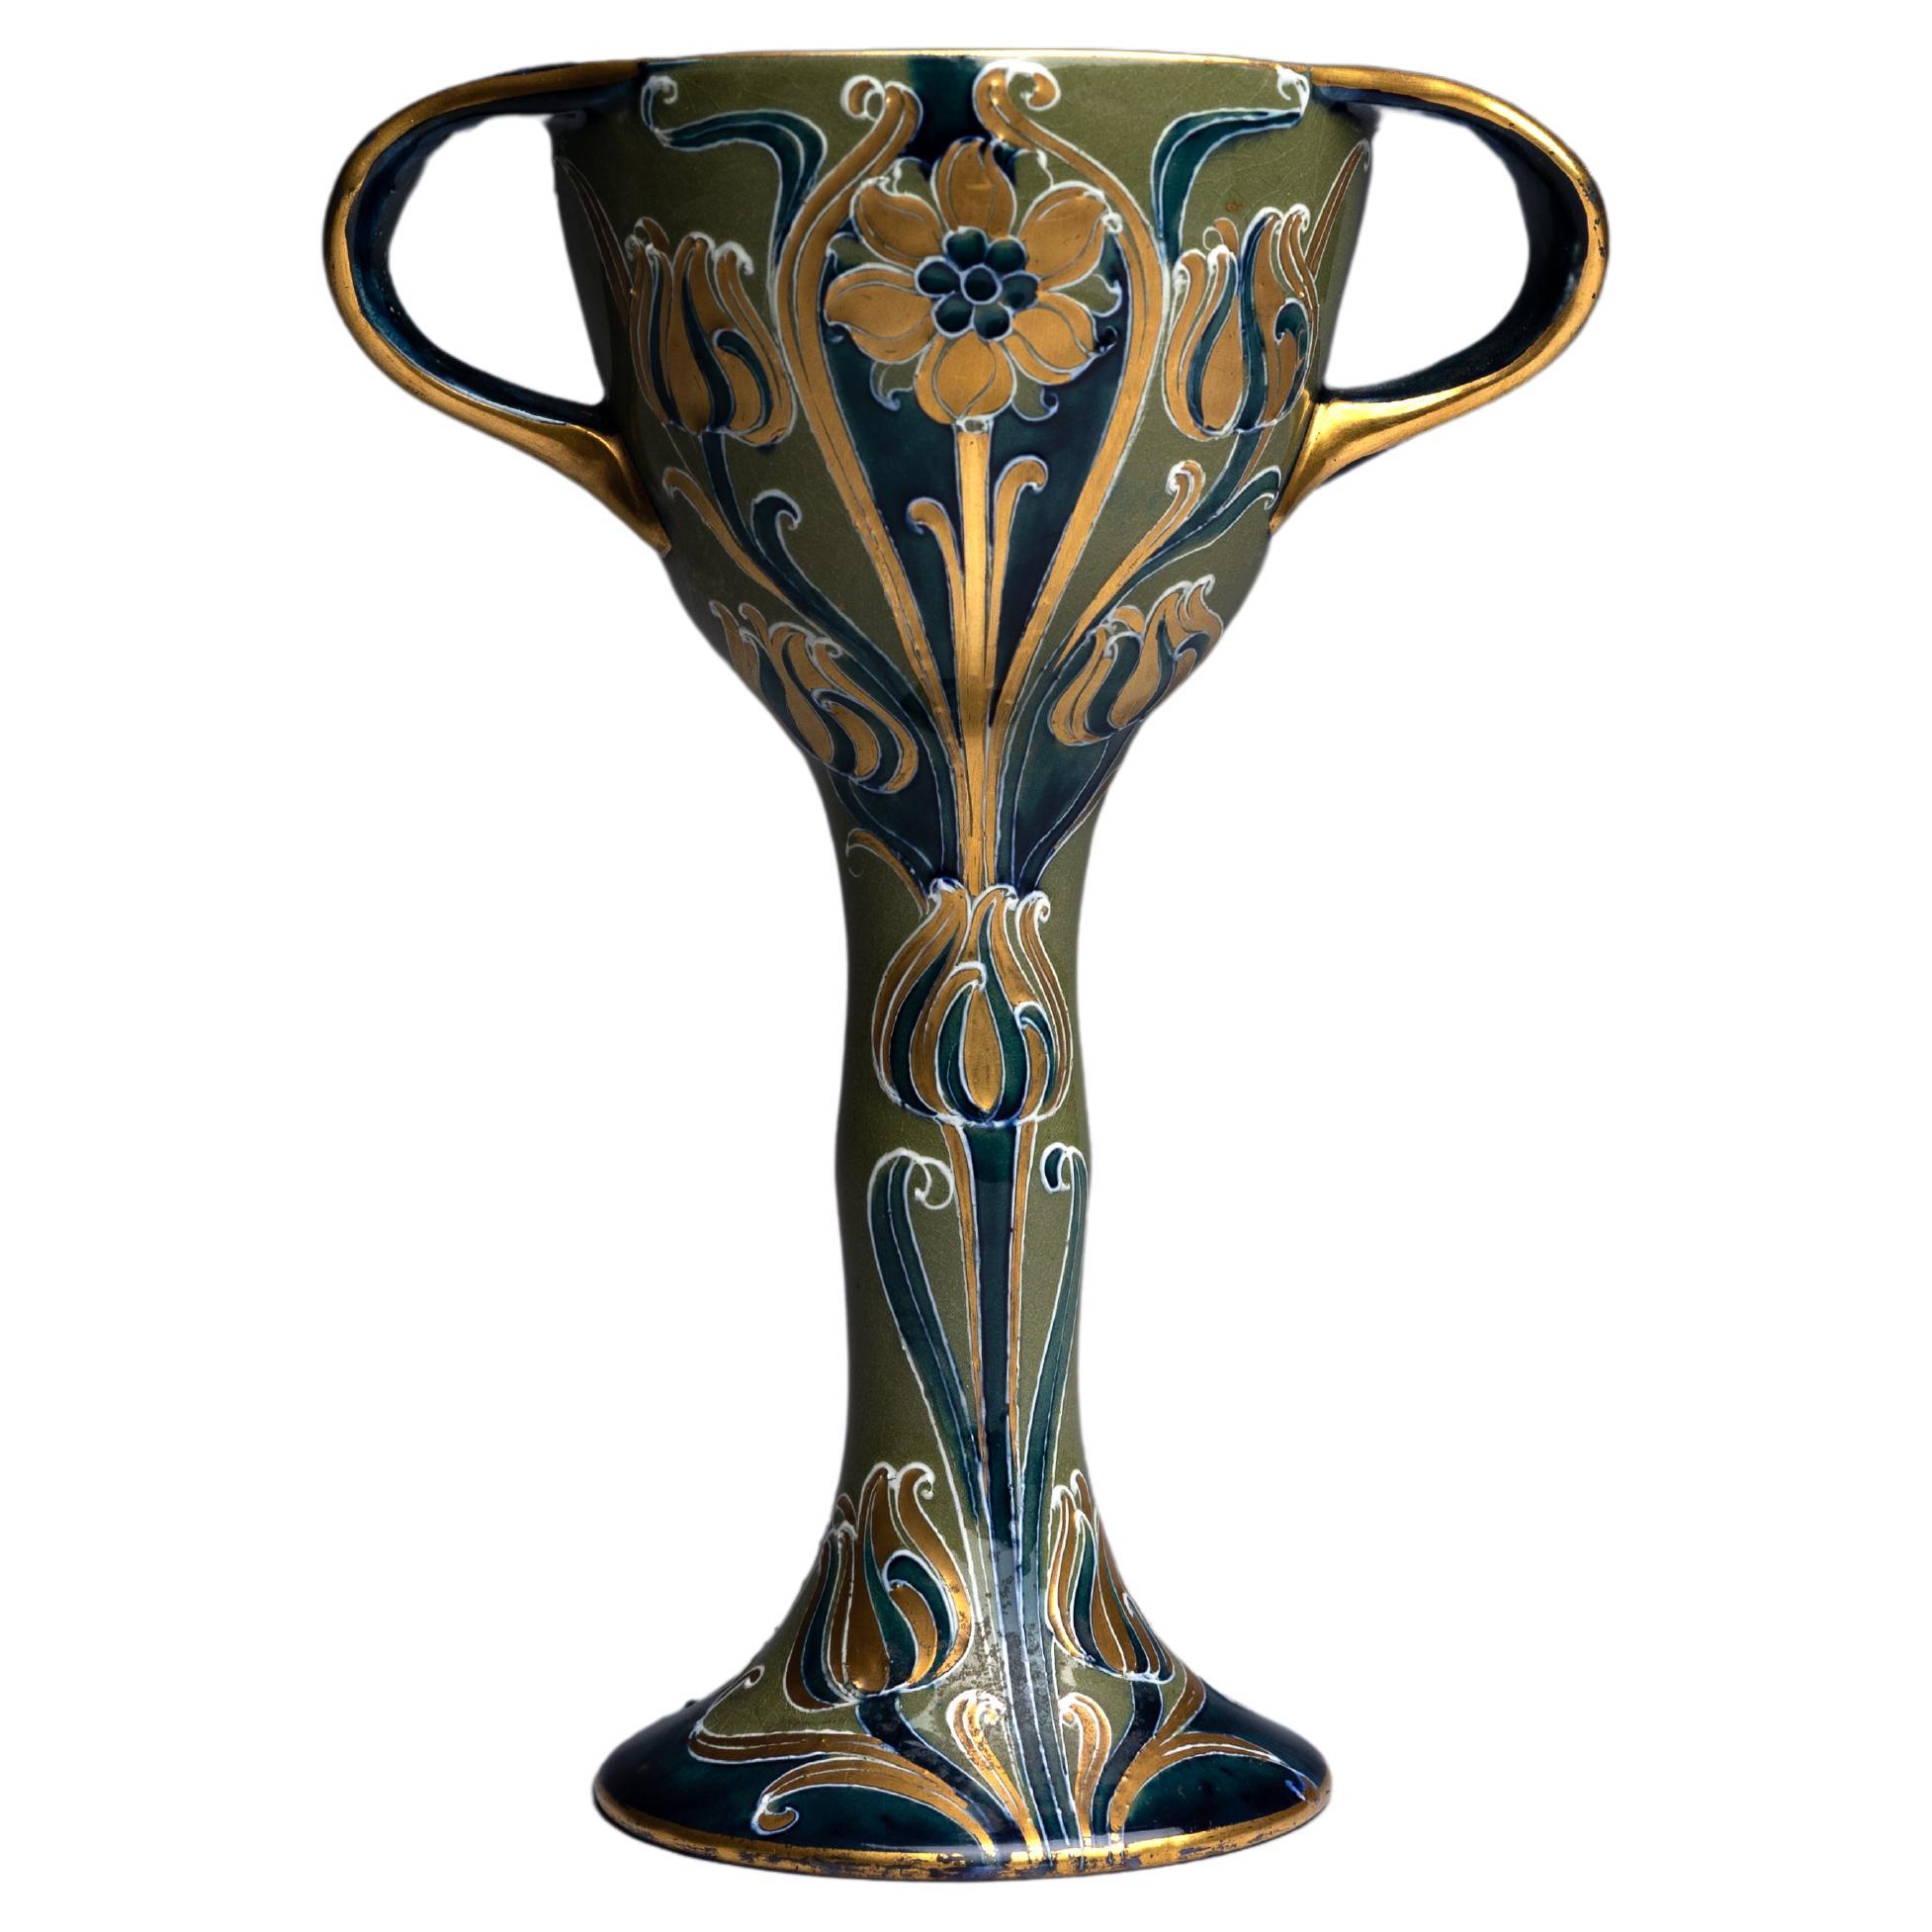 William Moorcroft Green and Gold Florian Ware Goblet